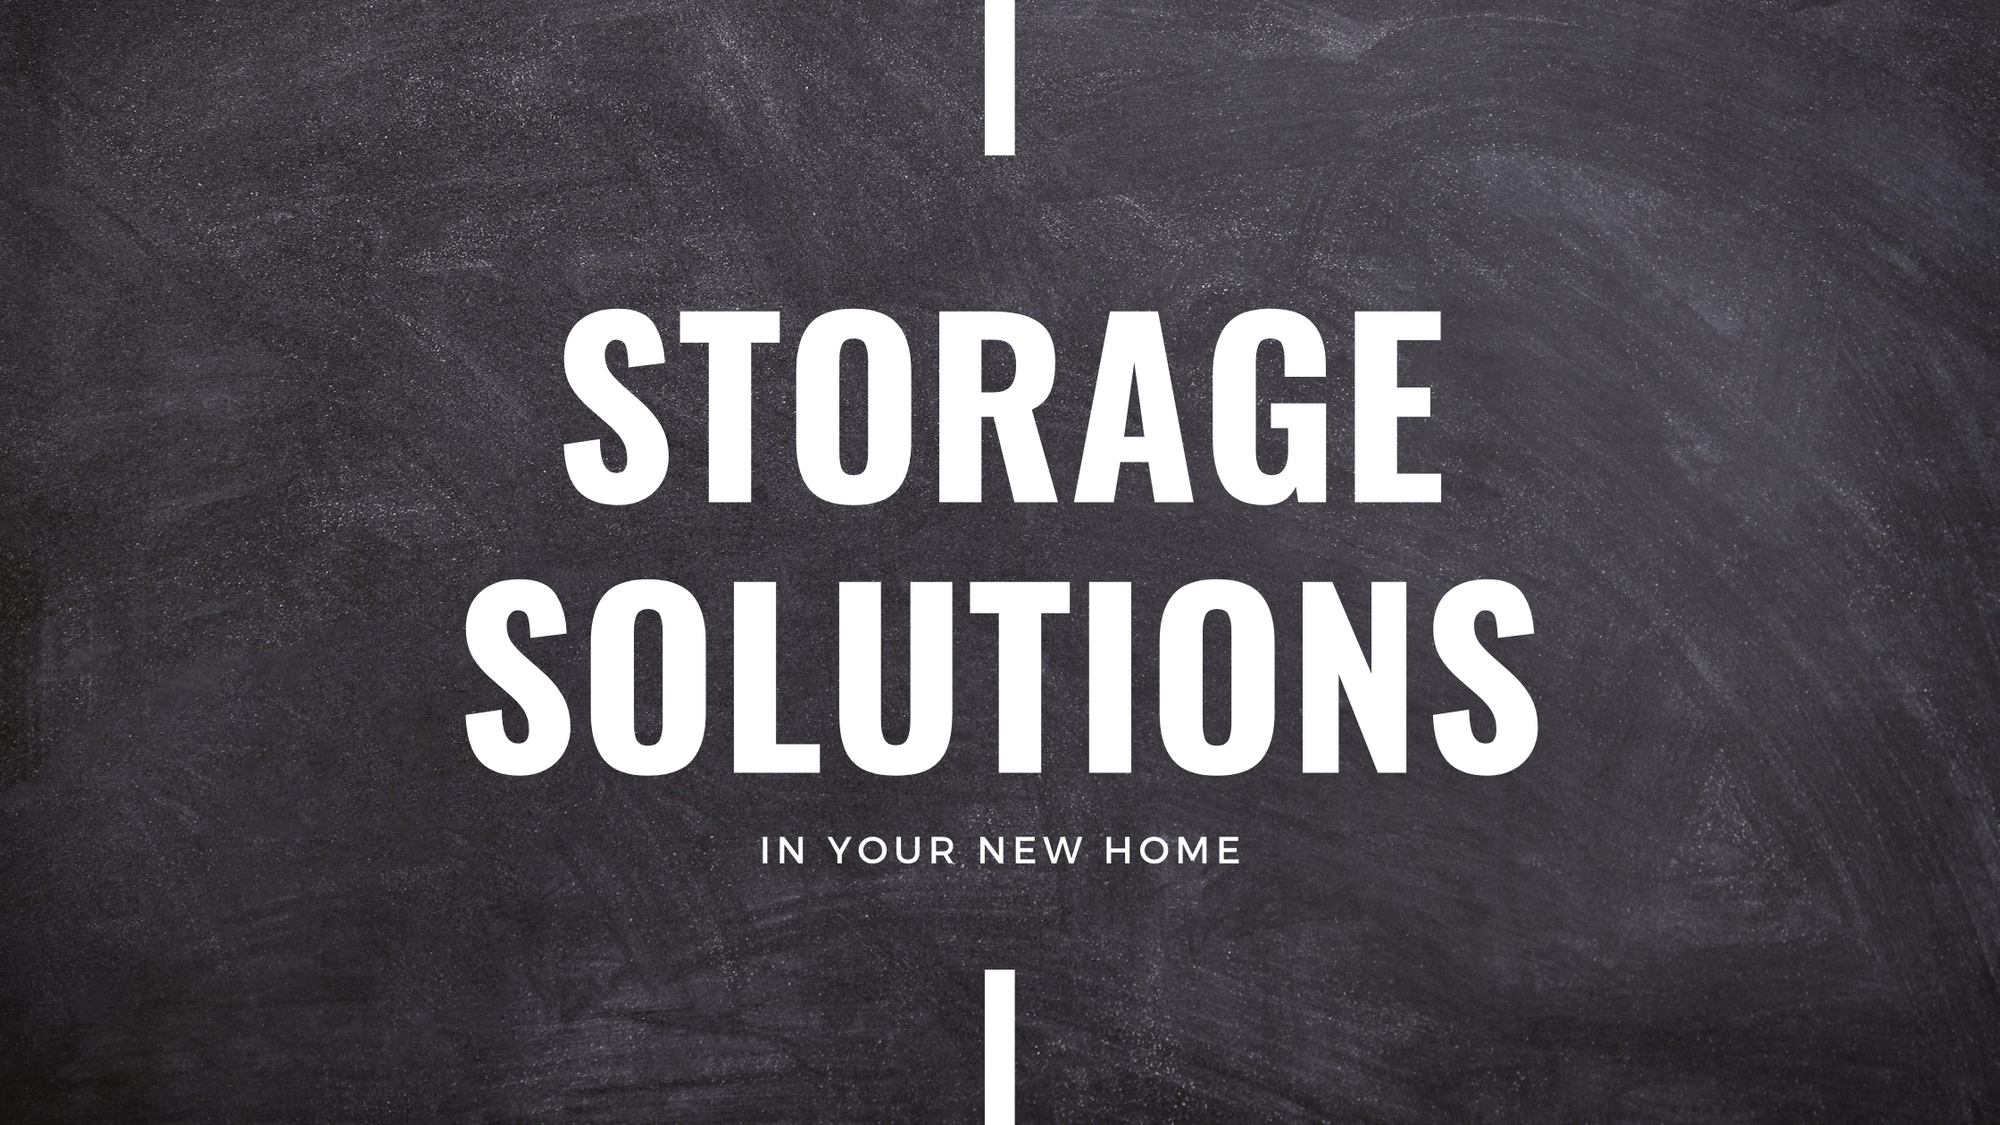 Storage Solutions in Your New Home Plan